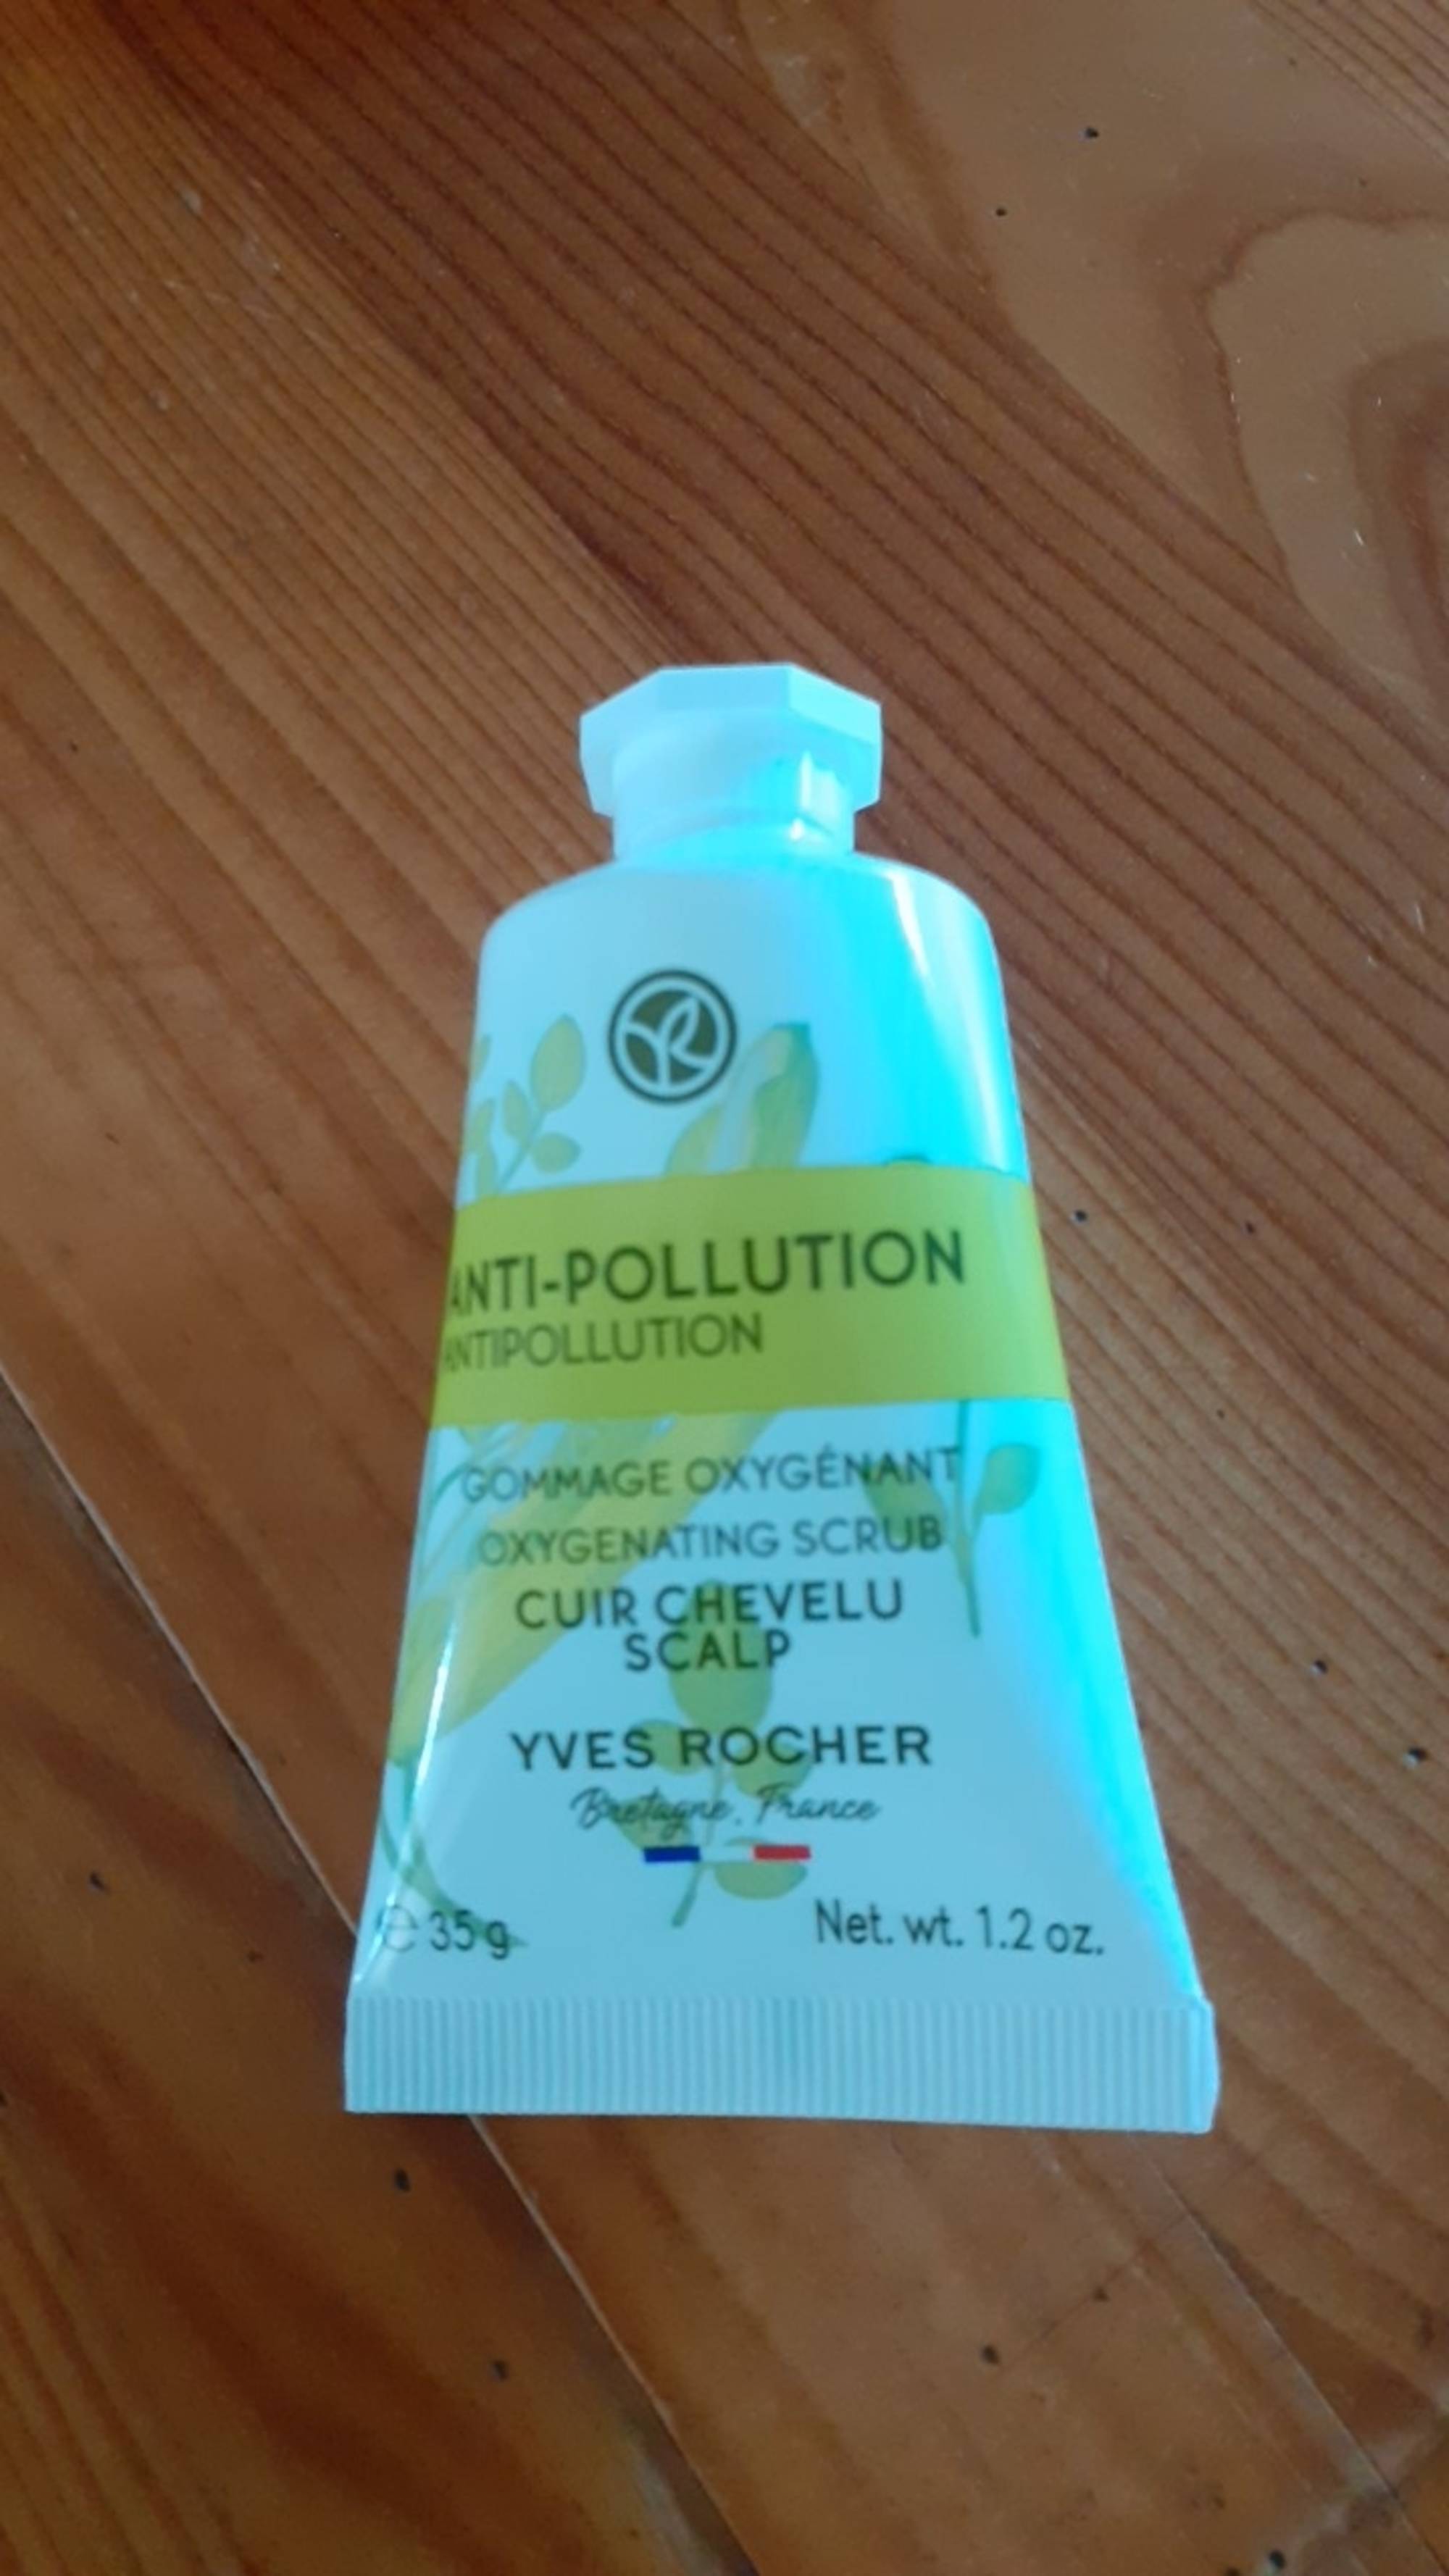 YVES ROCHER - Anti-pollution - Gommage oxygénant